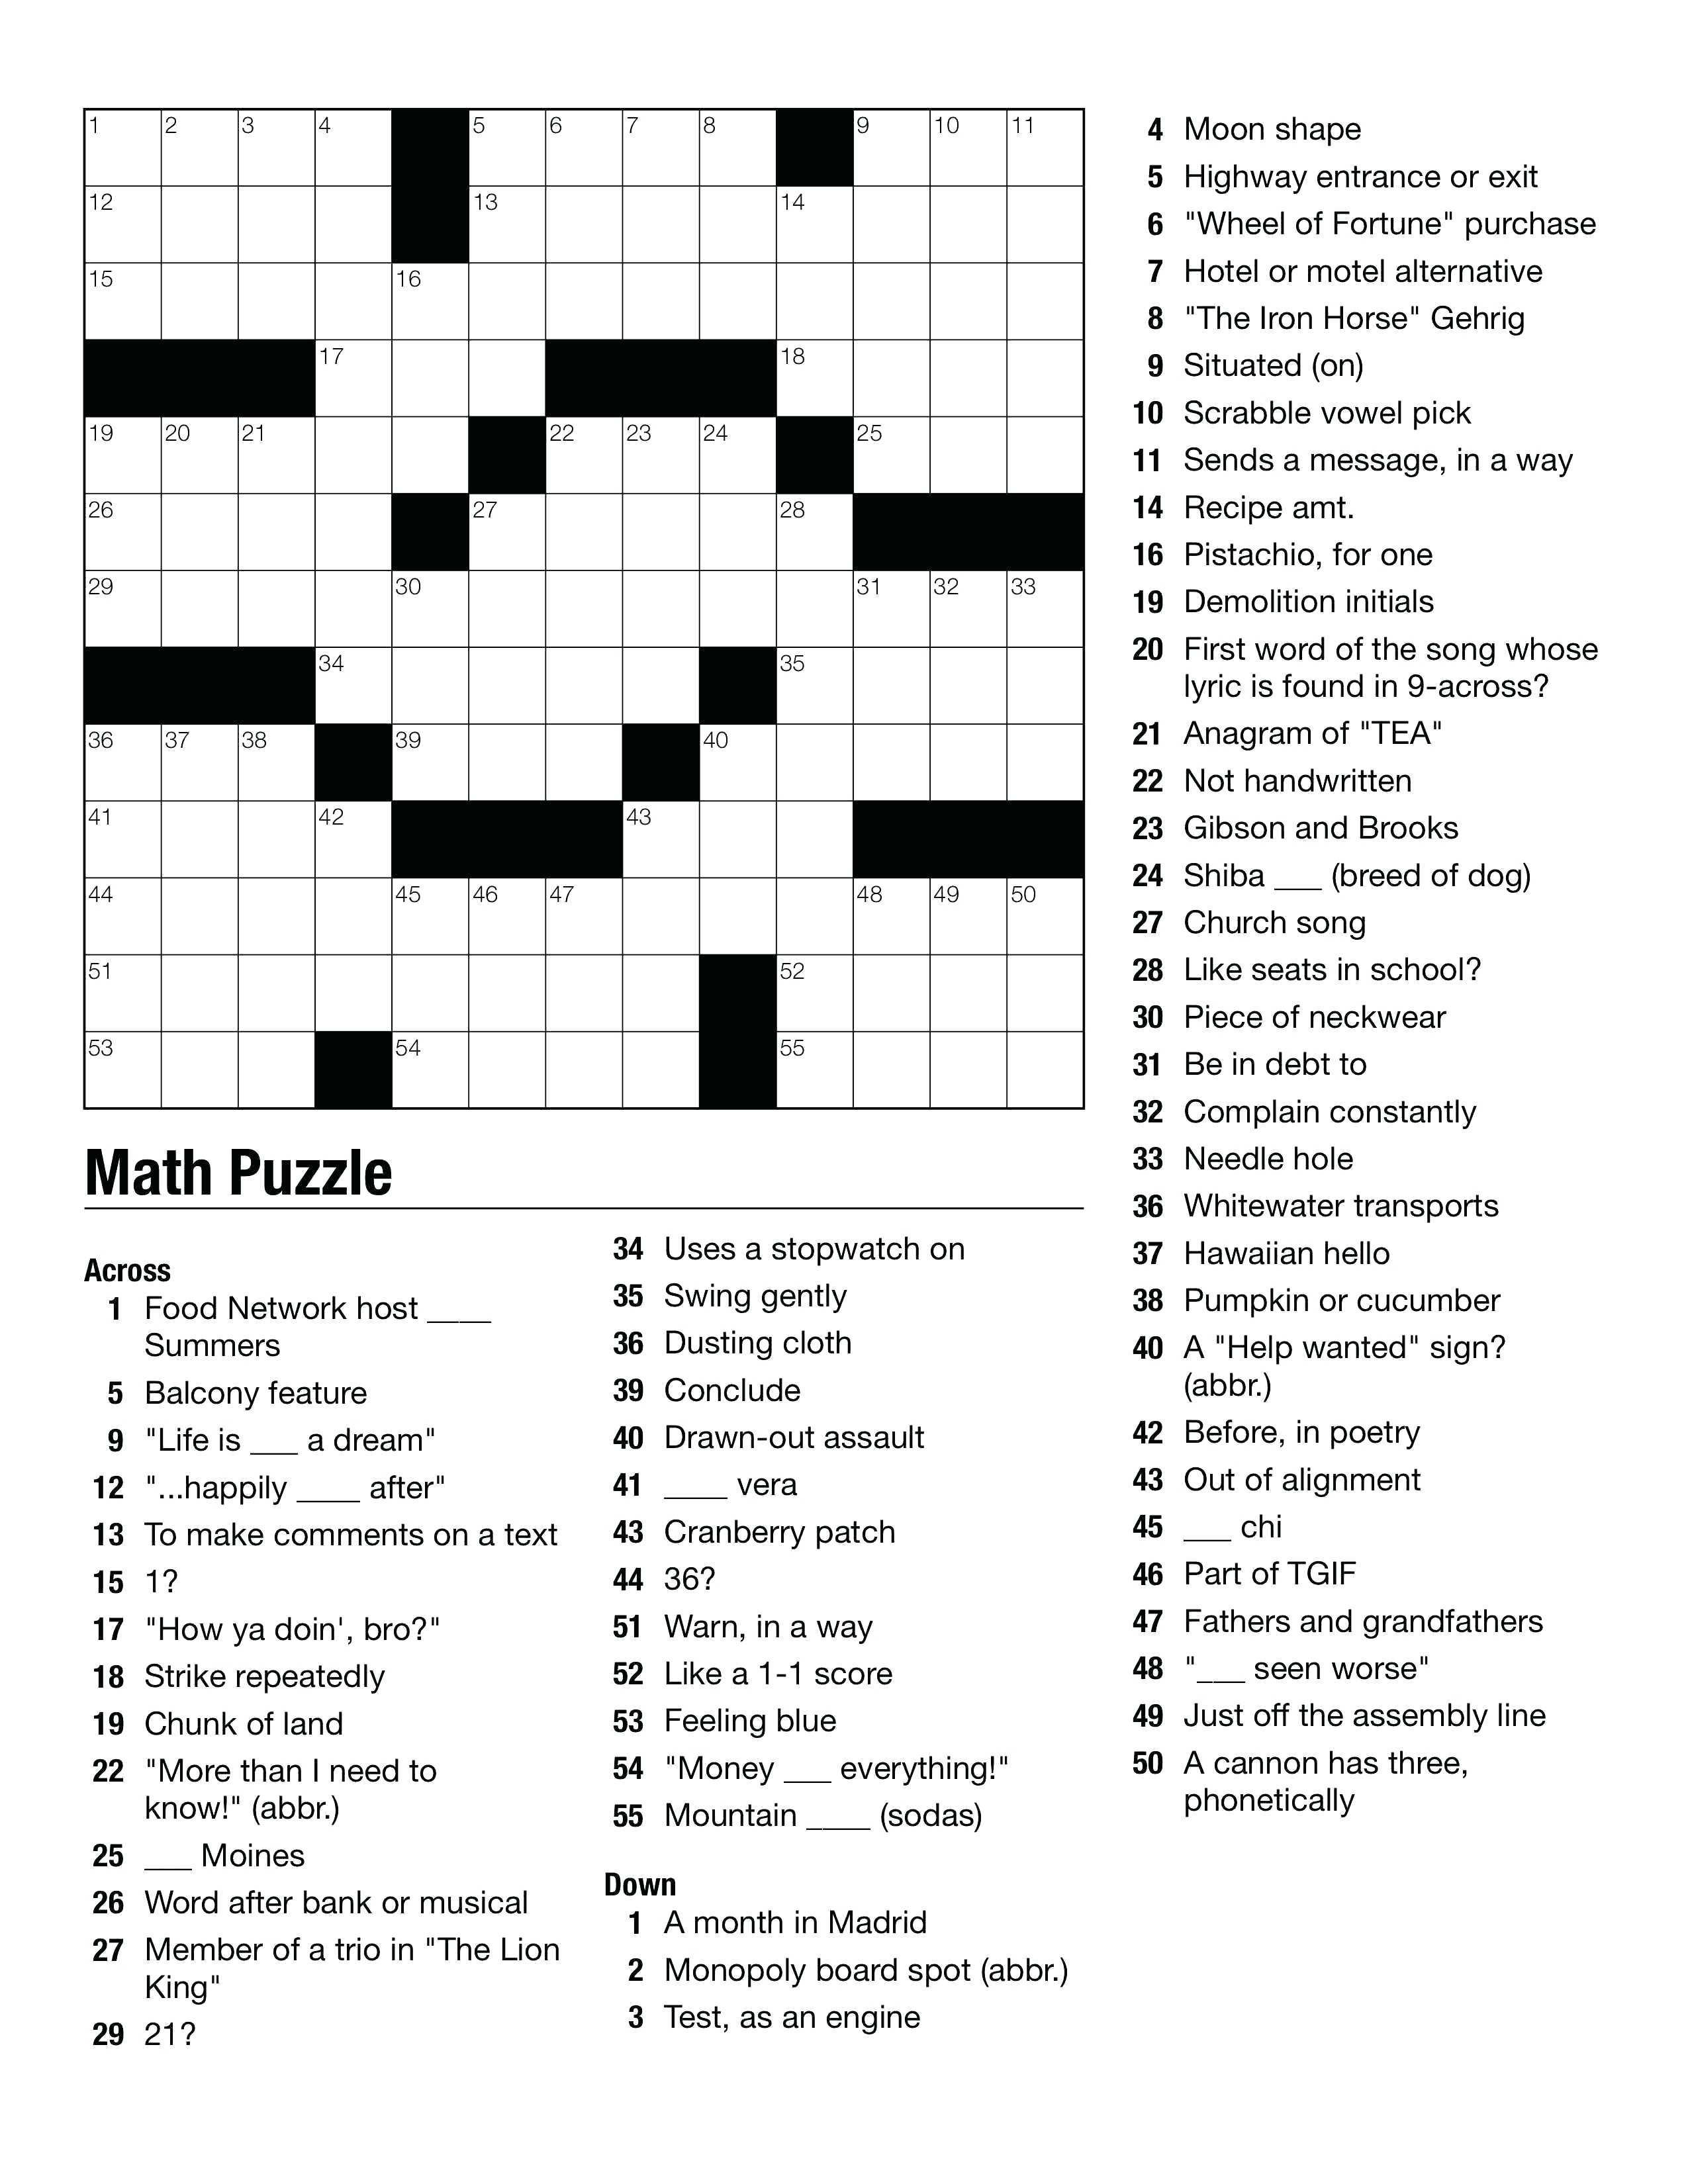 Geometry Puzzles Math Geometry Puzzle First Day In Cooperative Base - Printable Crossword Puzzles High School